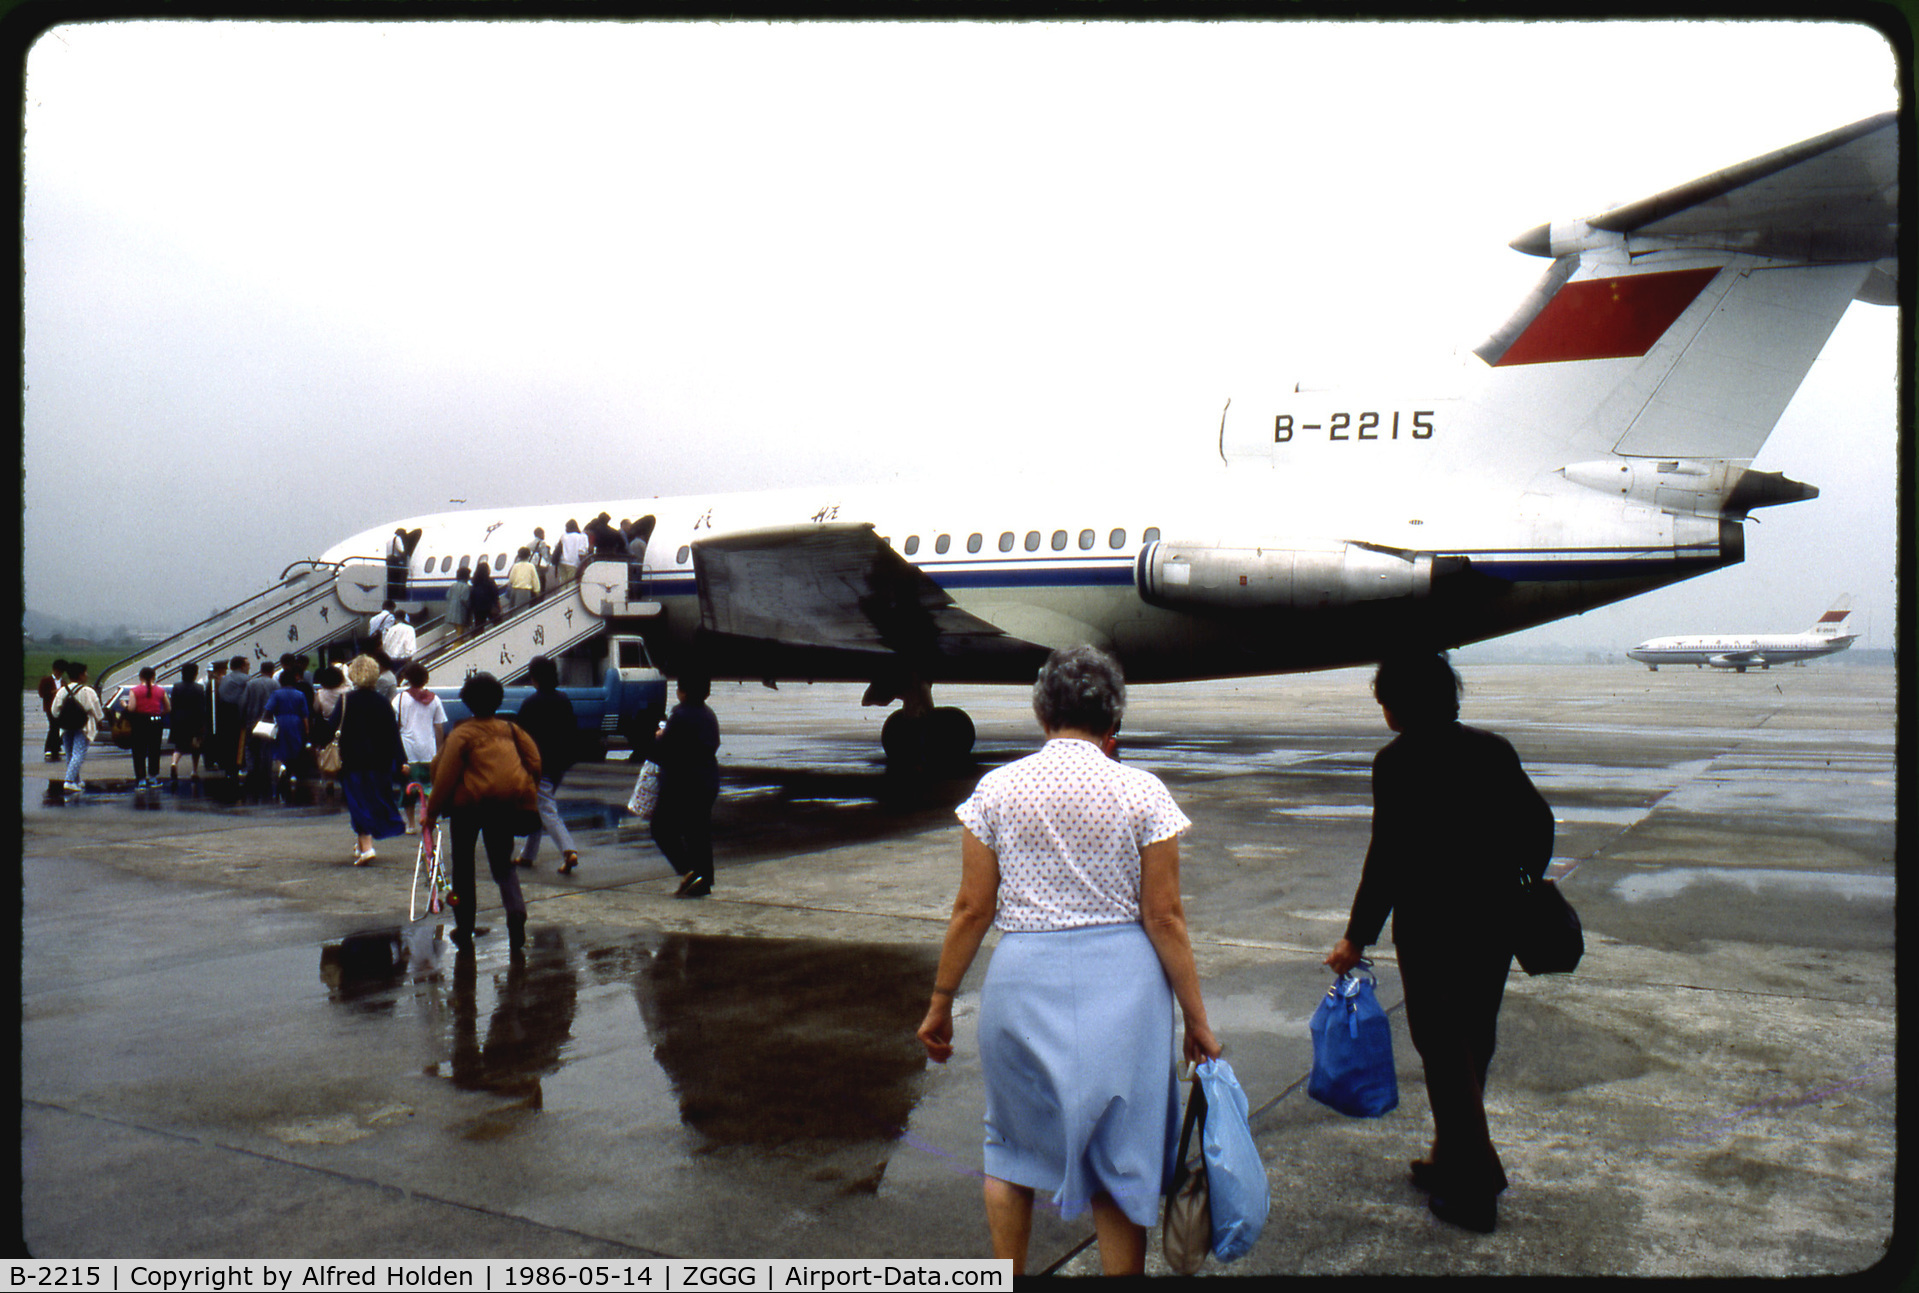 B-2215, 1972 Hawker Siddeley HS-121 Trident 2E-107 C/N 2166, Chinese passengers and Western tourists walk toward one of CAAC's British-built Trident jets, B-2215, in order to board a flight from Guangzhou to Guilin. Taken at Guangzhou Baiyun International Airport in May of 1986. Scanned from a Kodachrome slide.